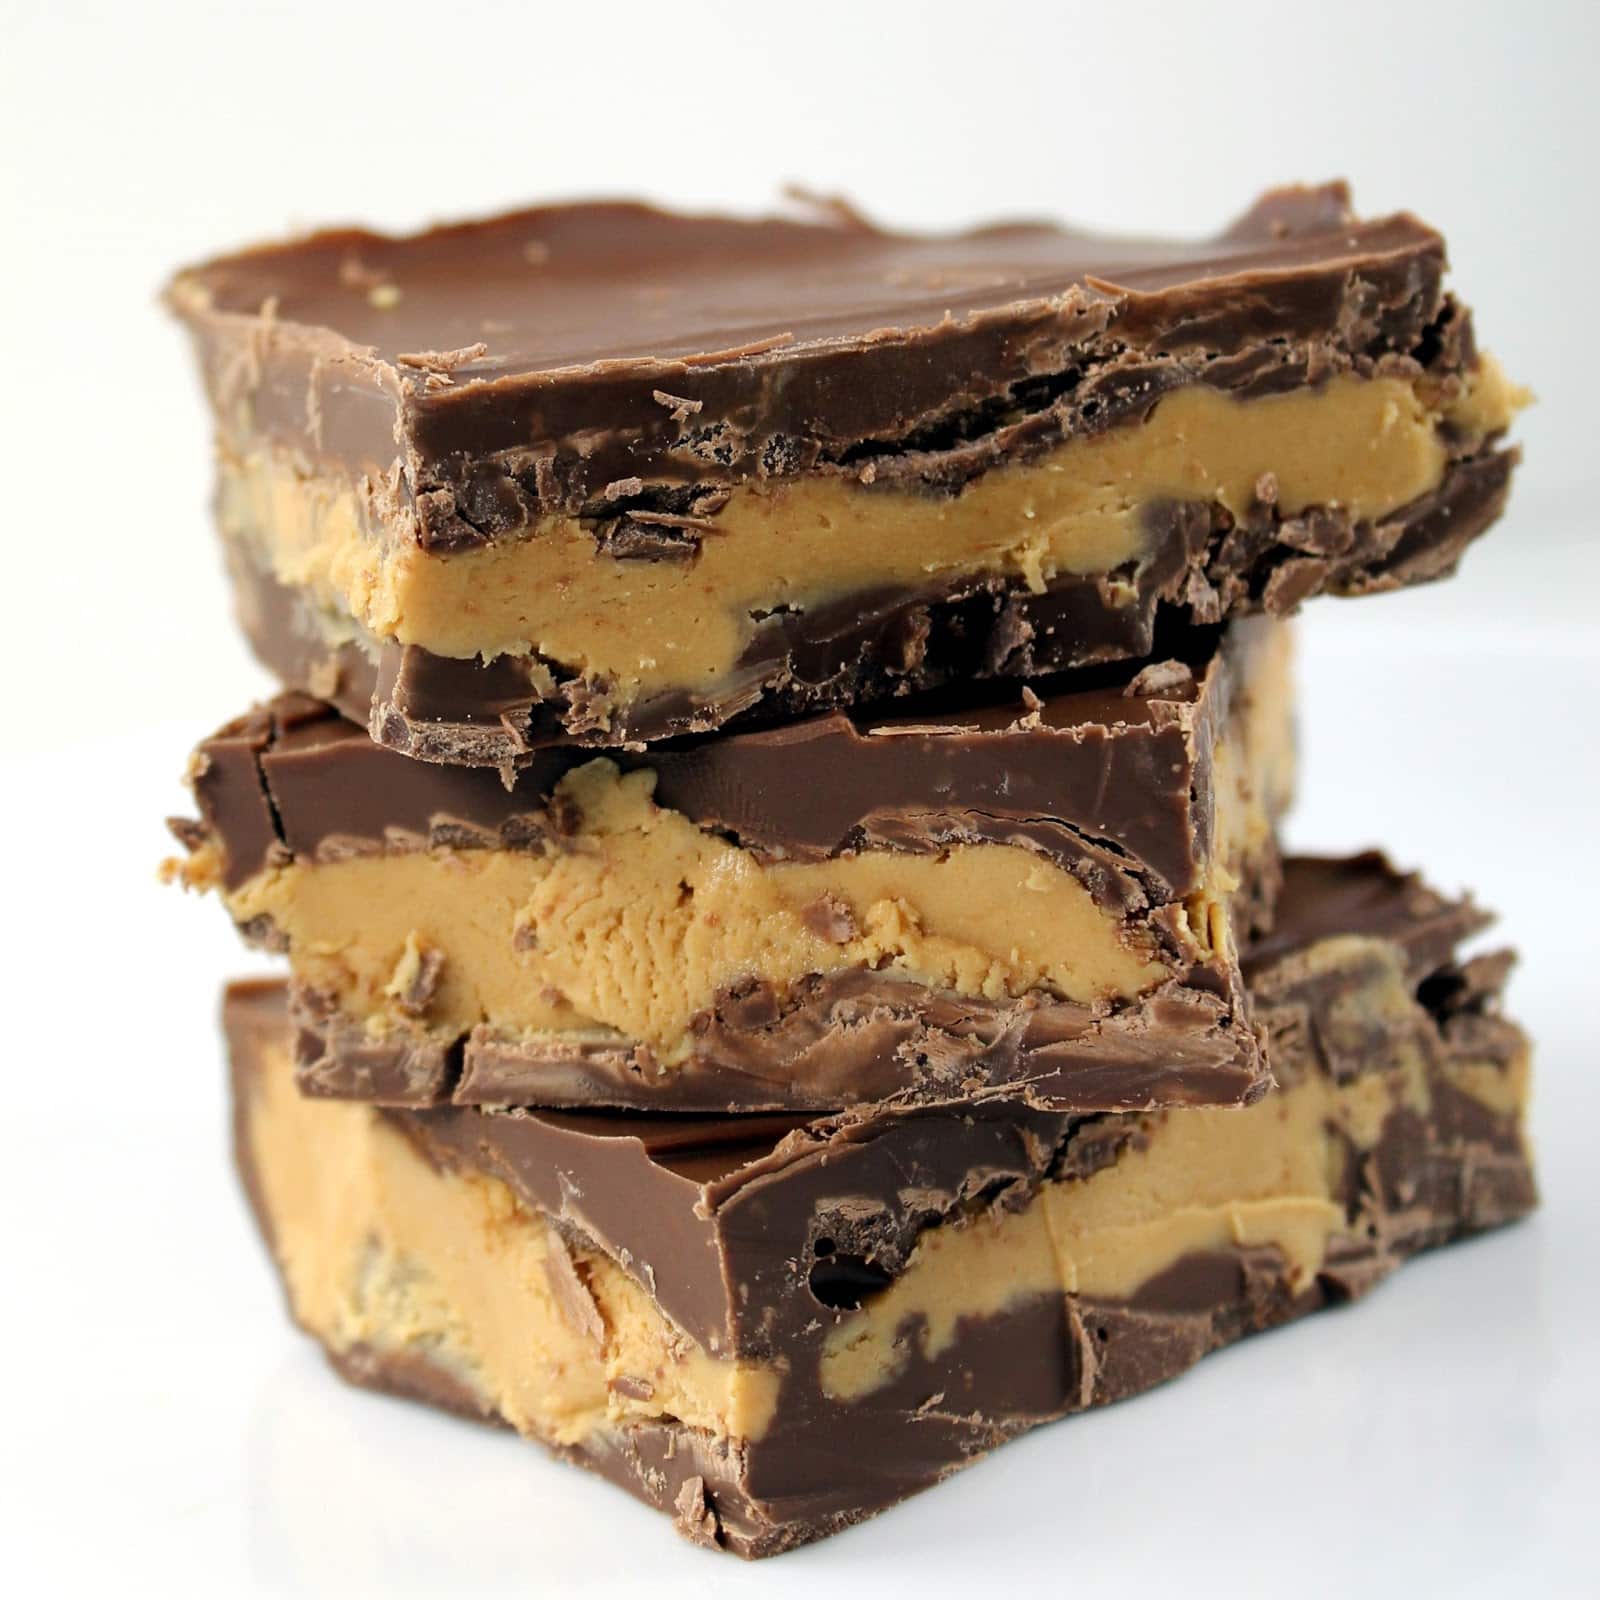 A stack of Peanut Butter Chocolate Bars layered with chocolate and peanut butter goodness